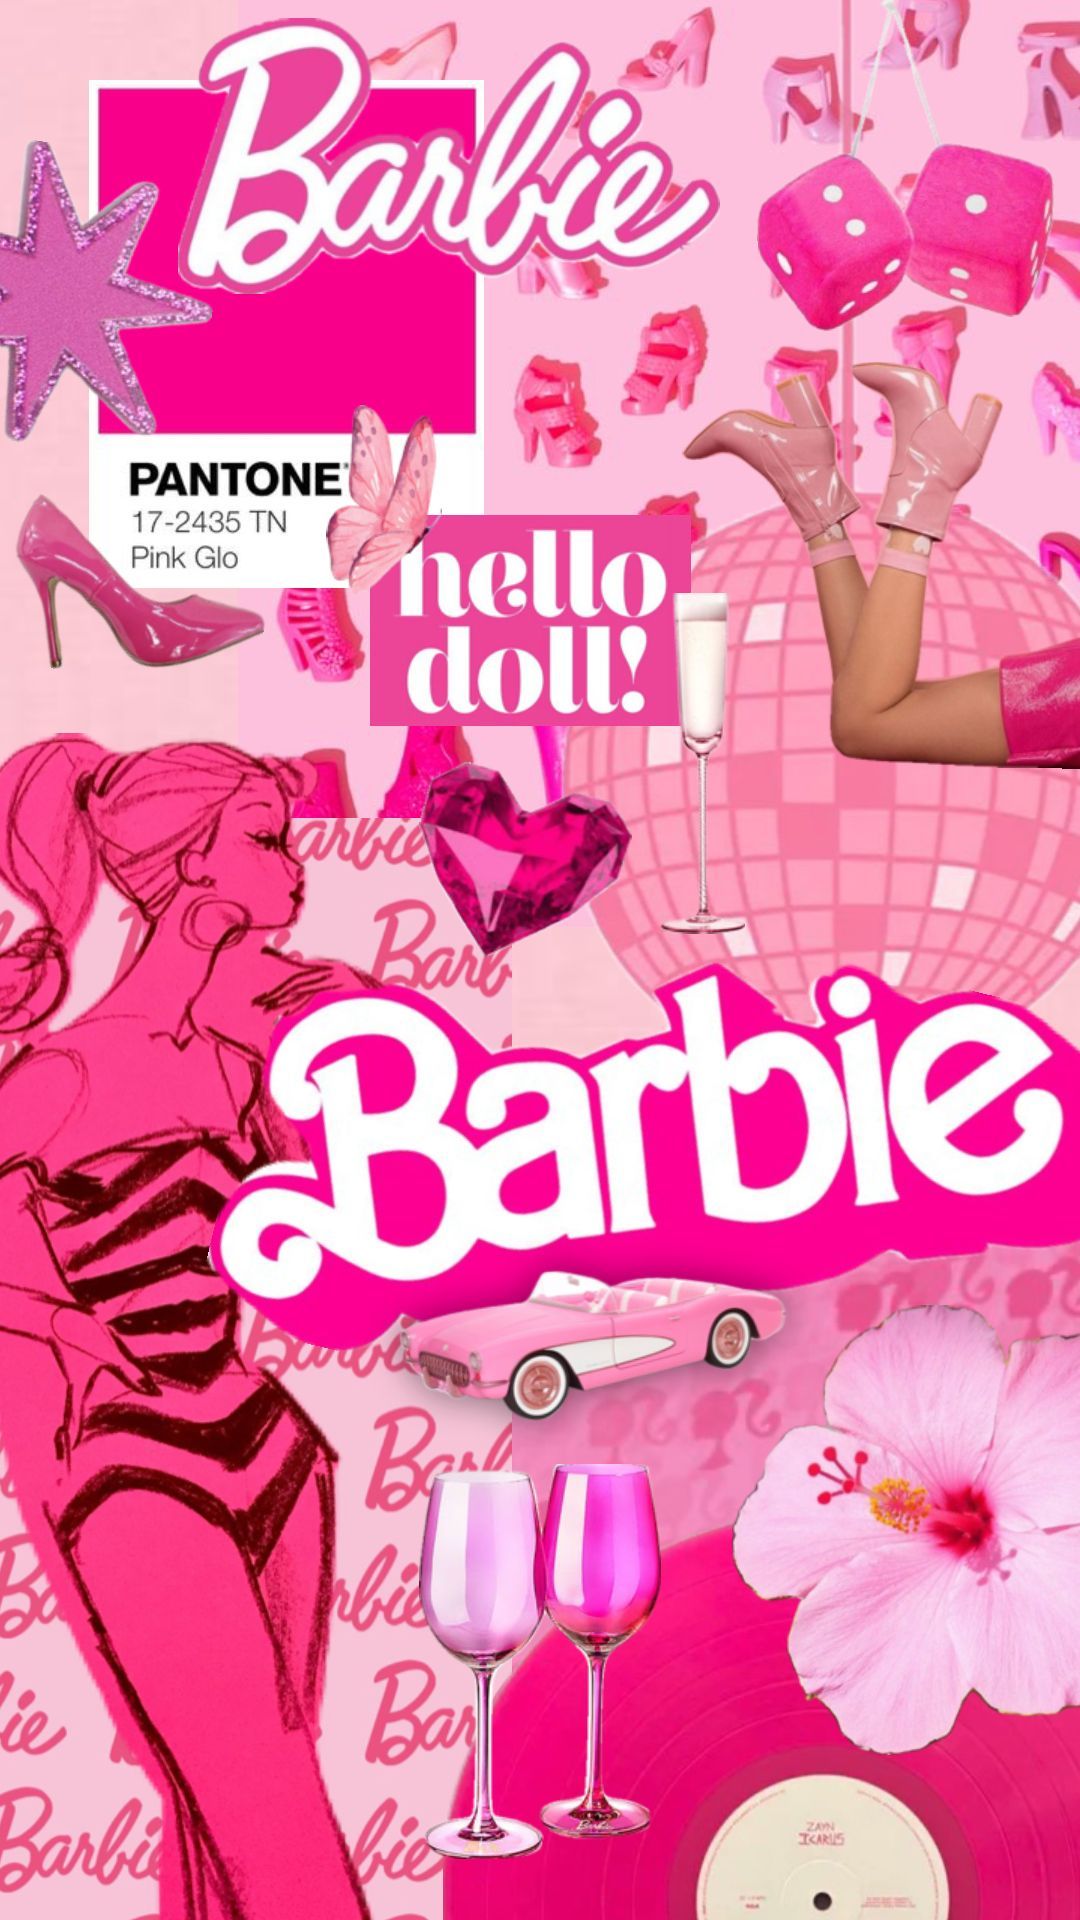 aesthetic #collage #barbie #pink #love